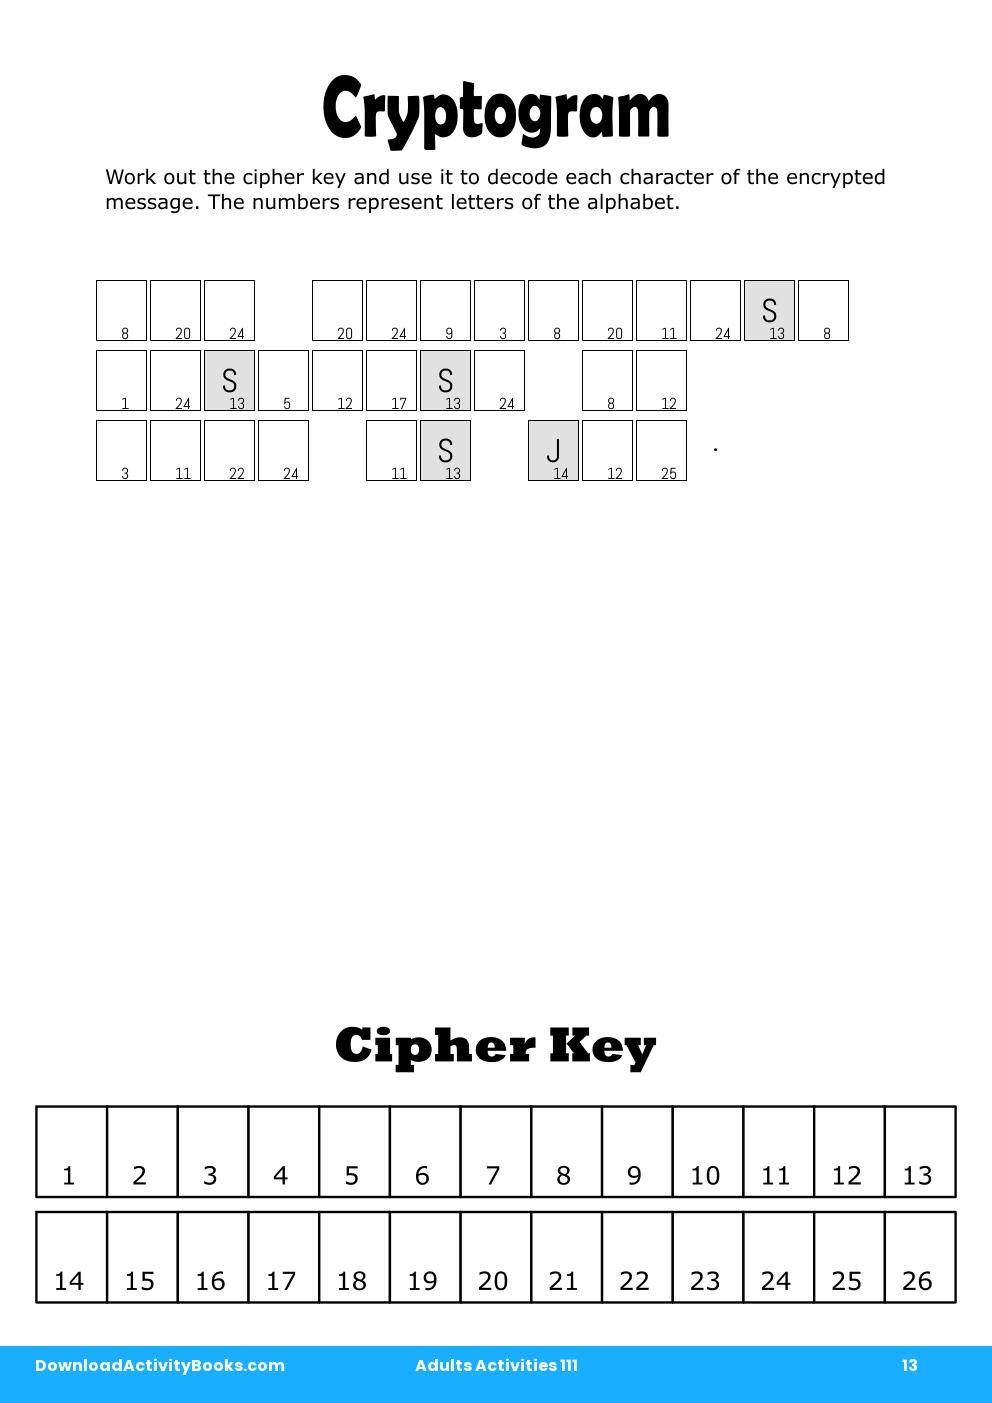 Cryptogram in Adults Activities 111